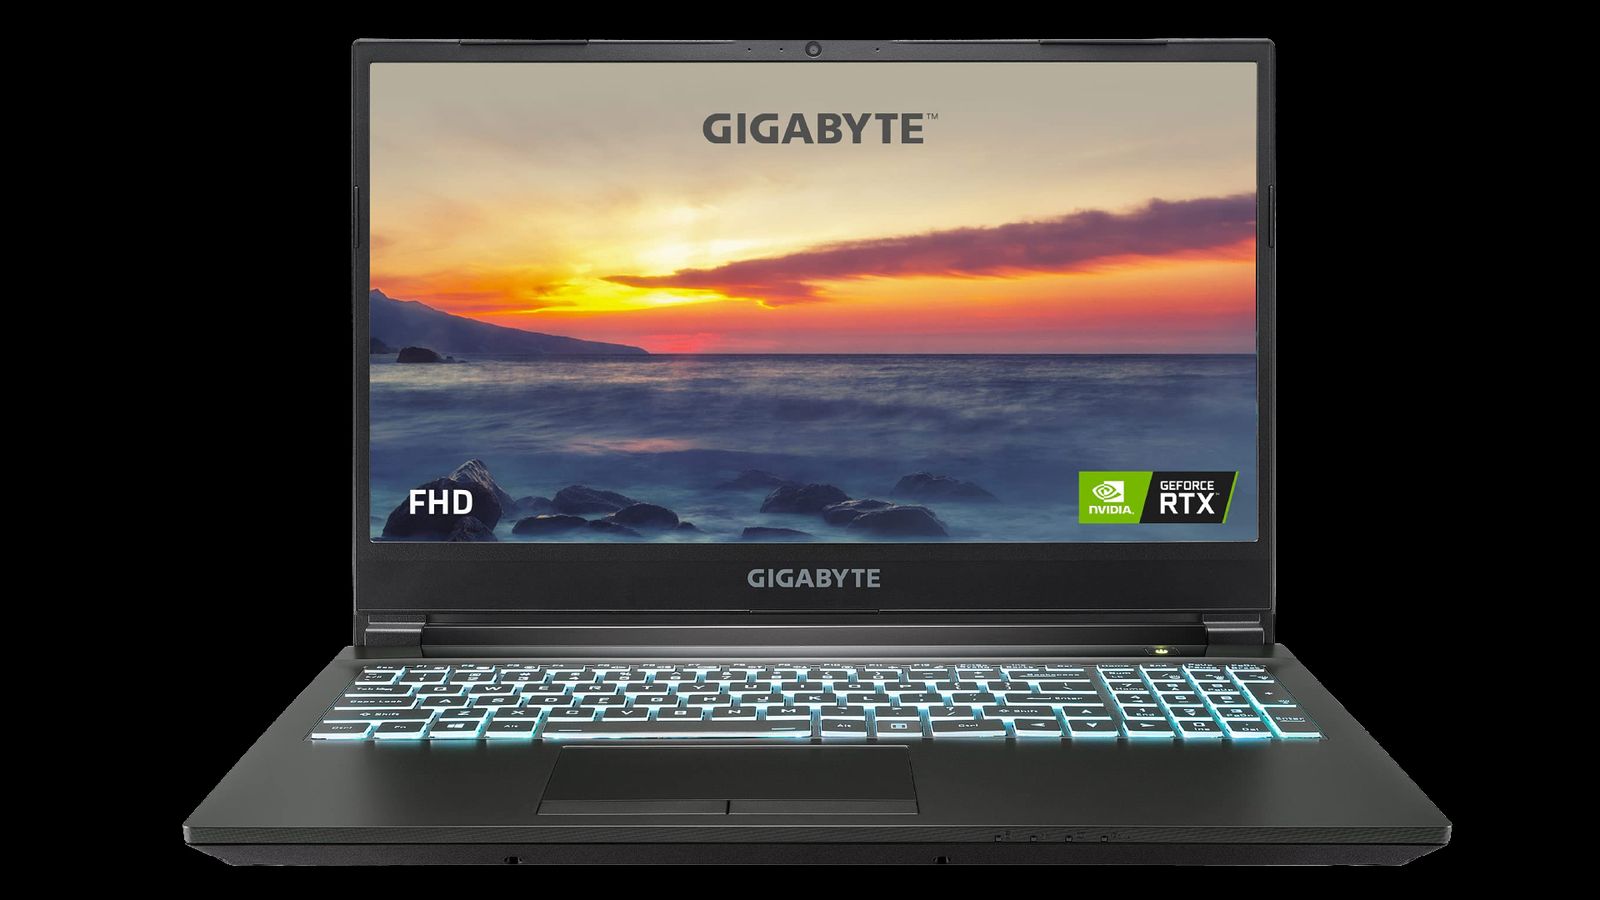 Gigabyte G5 MD product image of a black laptop with green backlit keys and a sunset on the display.